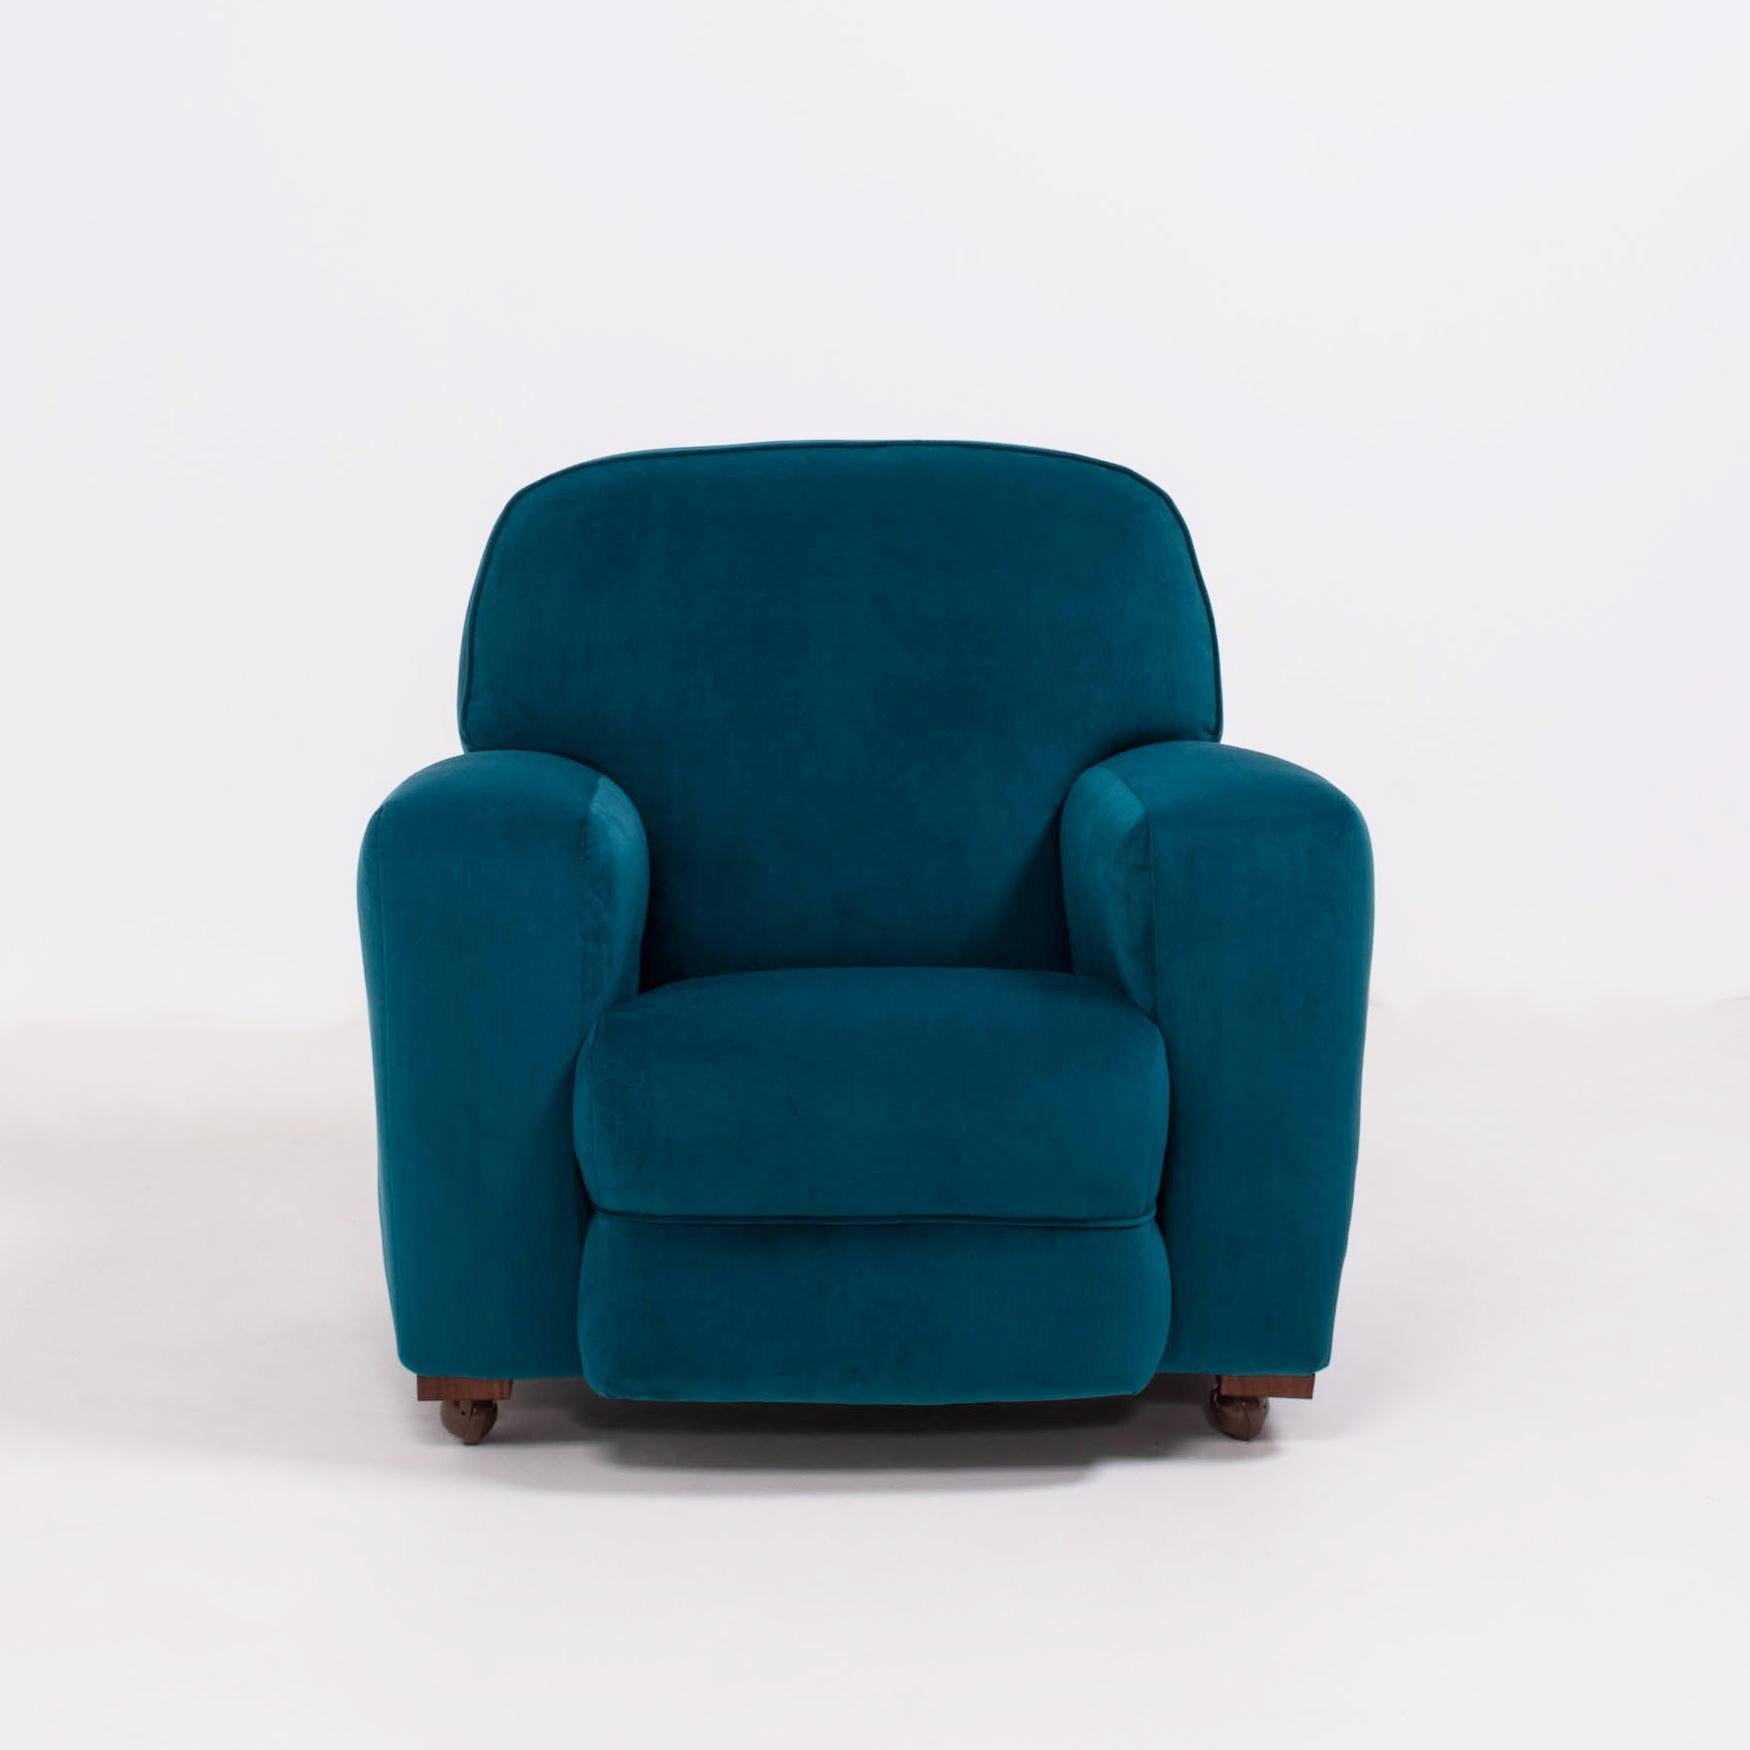 This is an original 1930s Art Deco curved pair of marching armchairs.

Newly reupholstered in plush blue teal velvet, the armchairs feature wide armrests and high, comfortable backs.

The blocks and castor wheels have been replaced on both